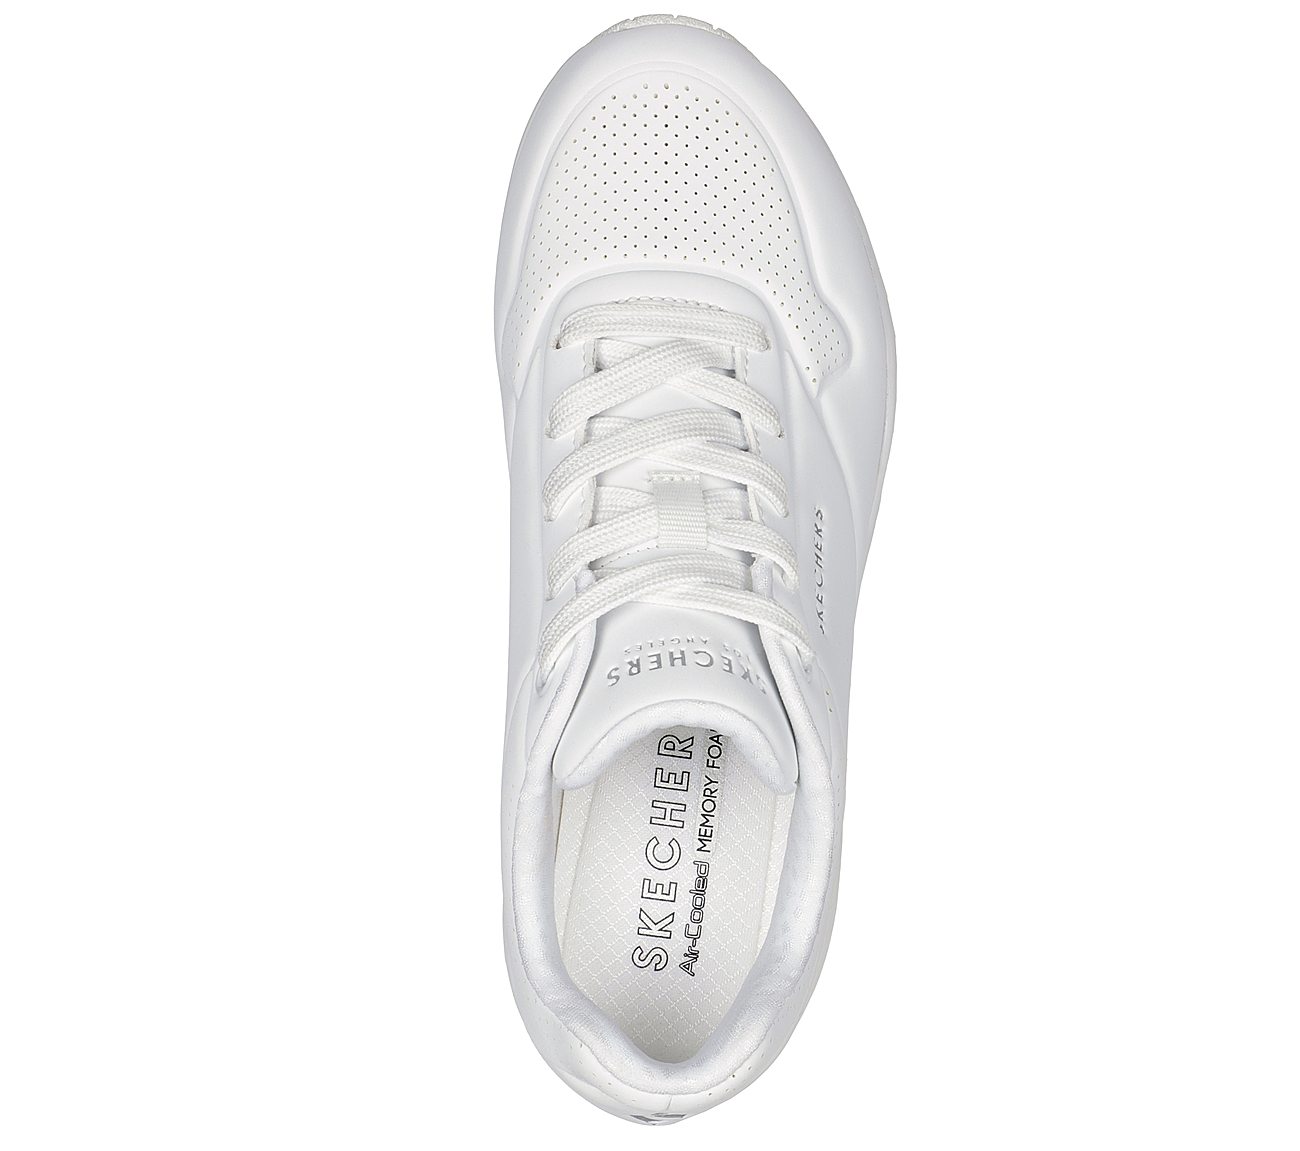 UNO - STAND ON AIR, WHITE Footwear Top View